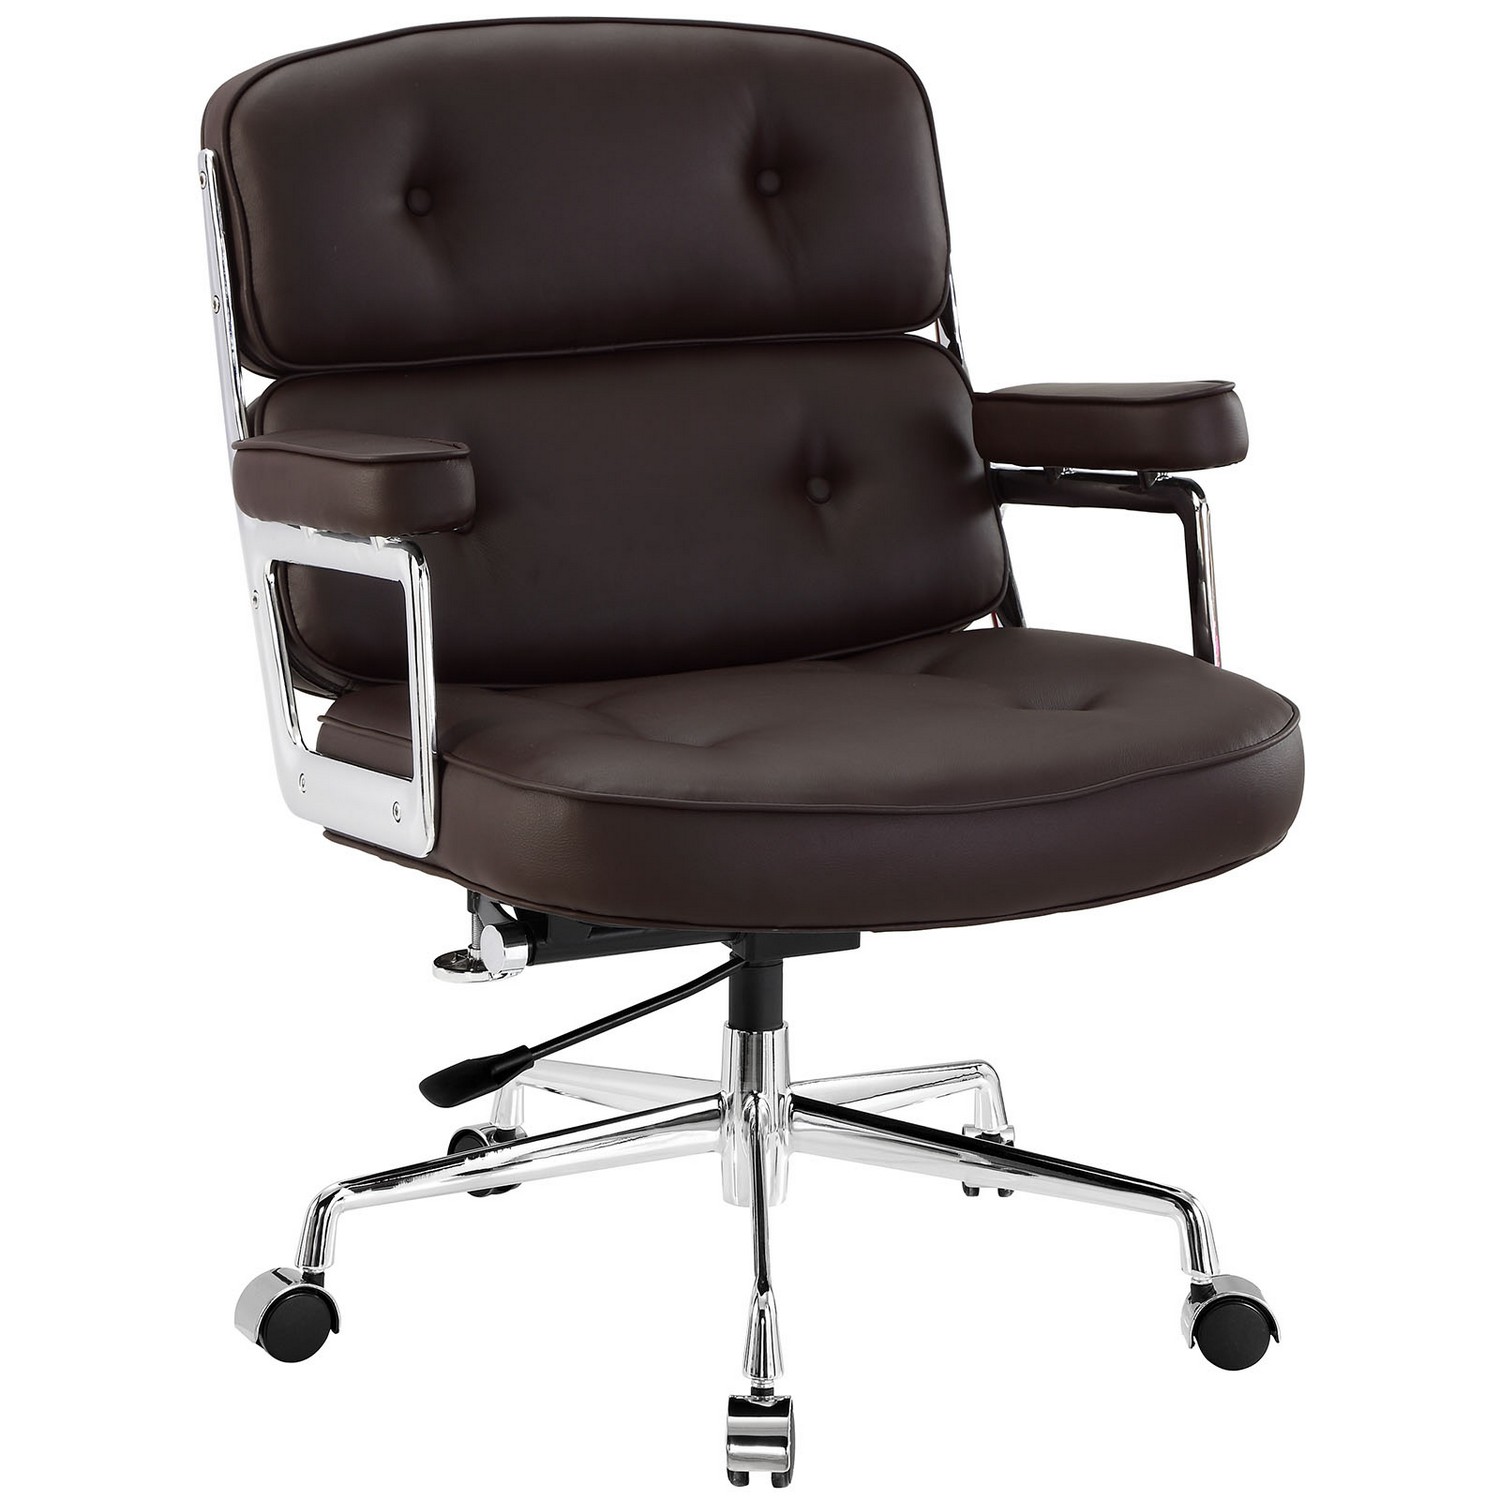 Modway Remix Office Chair - Brown